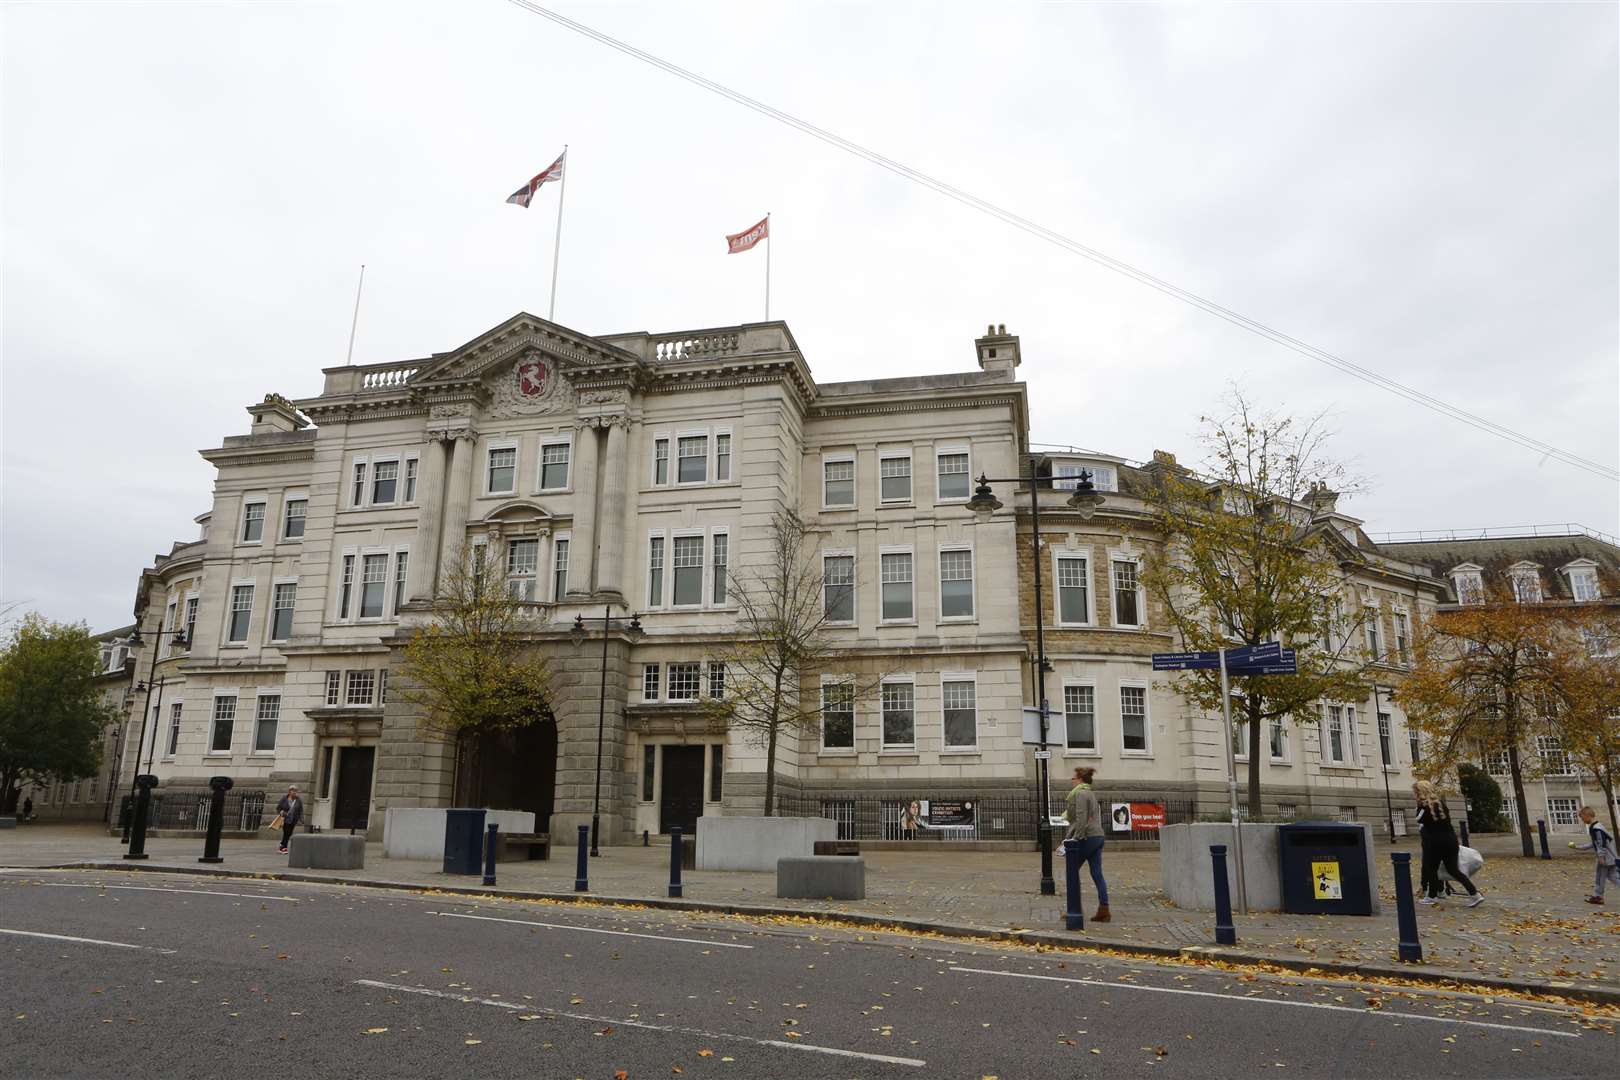 The three-week inquest is taking place in Maidstone's County Hall